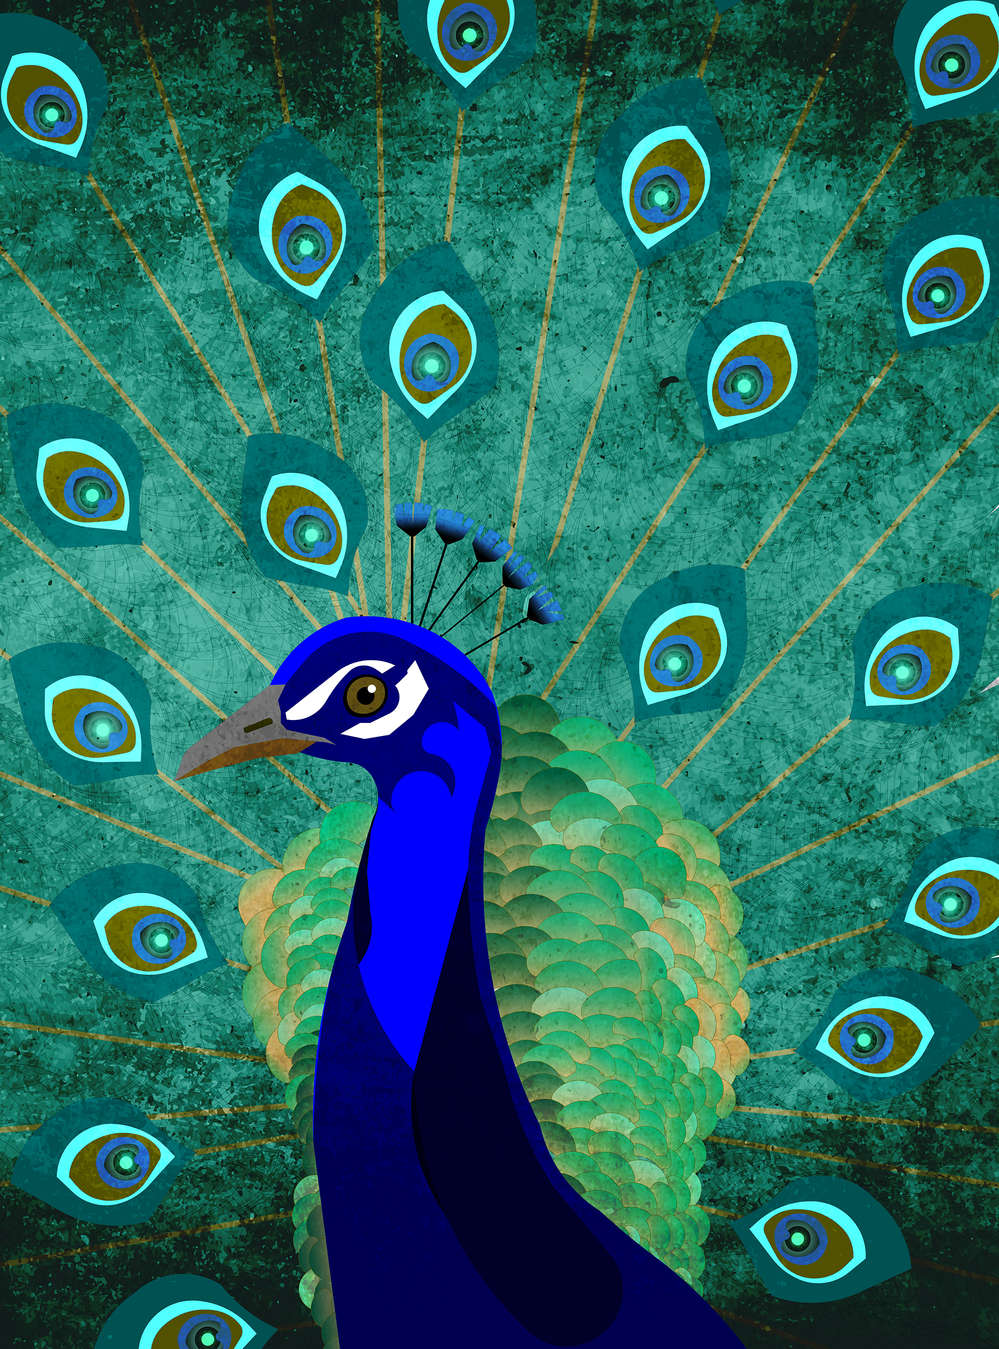             Peacock mural with feather wheel - blue, green, petrol
        